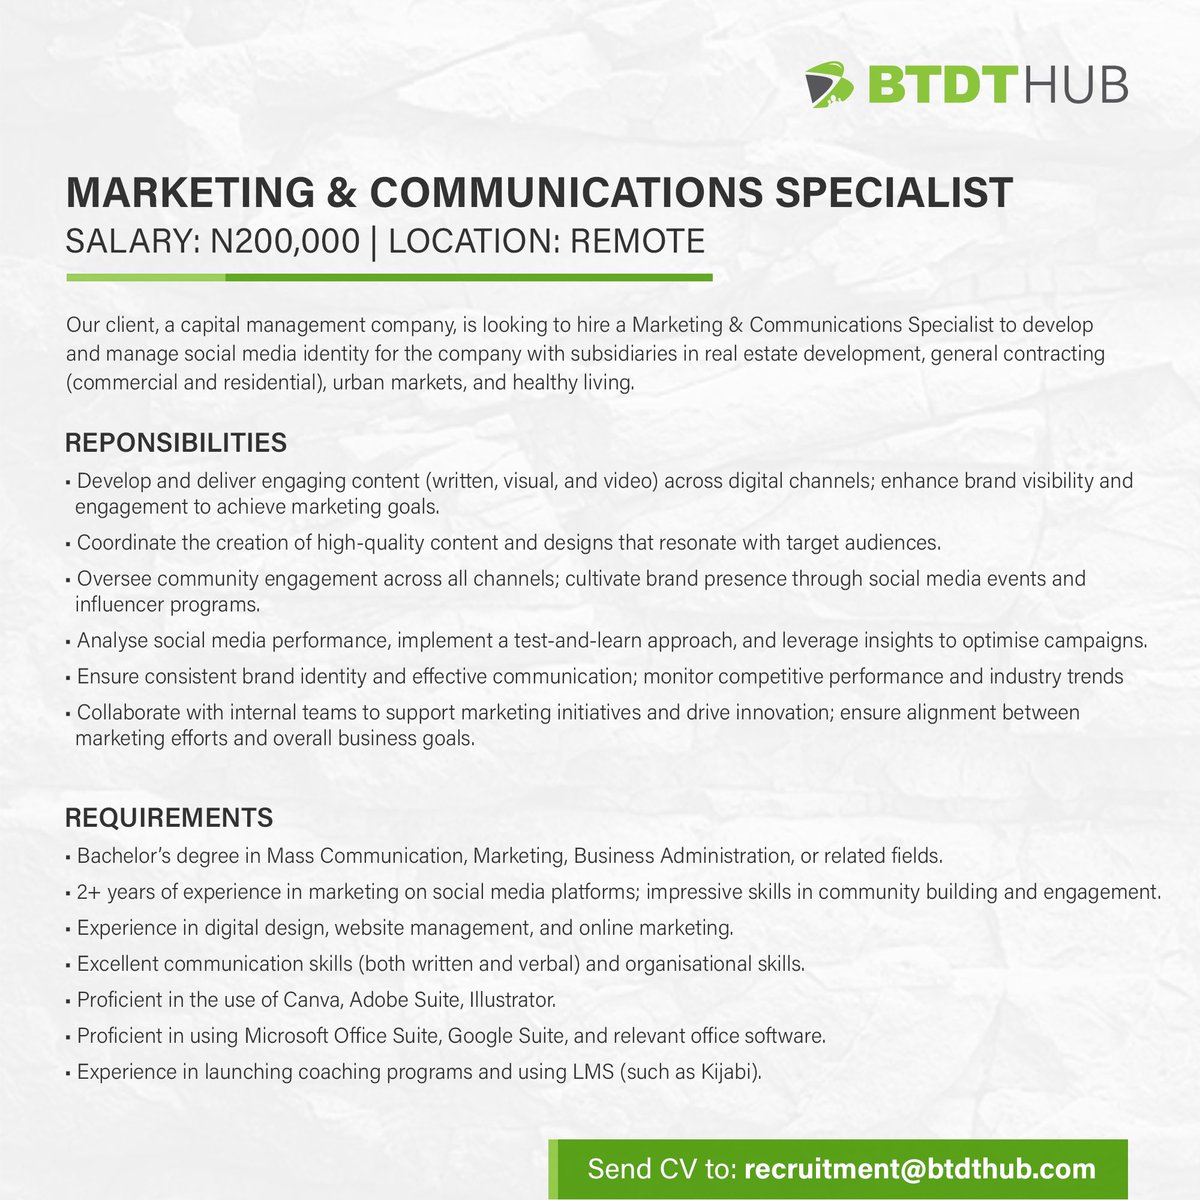 Vacancy Role: Marketing & Communications Specialist Location: Remote Salary: N200,000 Requirement: 2+ years of experience in Digital Marketing; impressive skills in community building and engagement. Qualified? Send your CV to RECRUITMENT@BTDTHUB.COM #BTDTHub